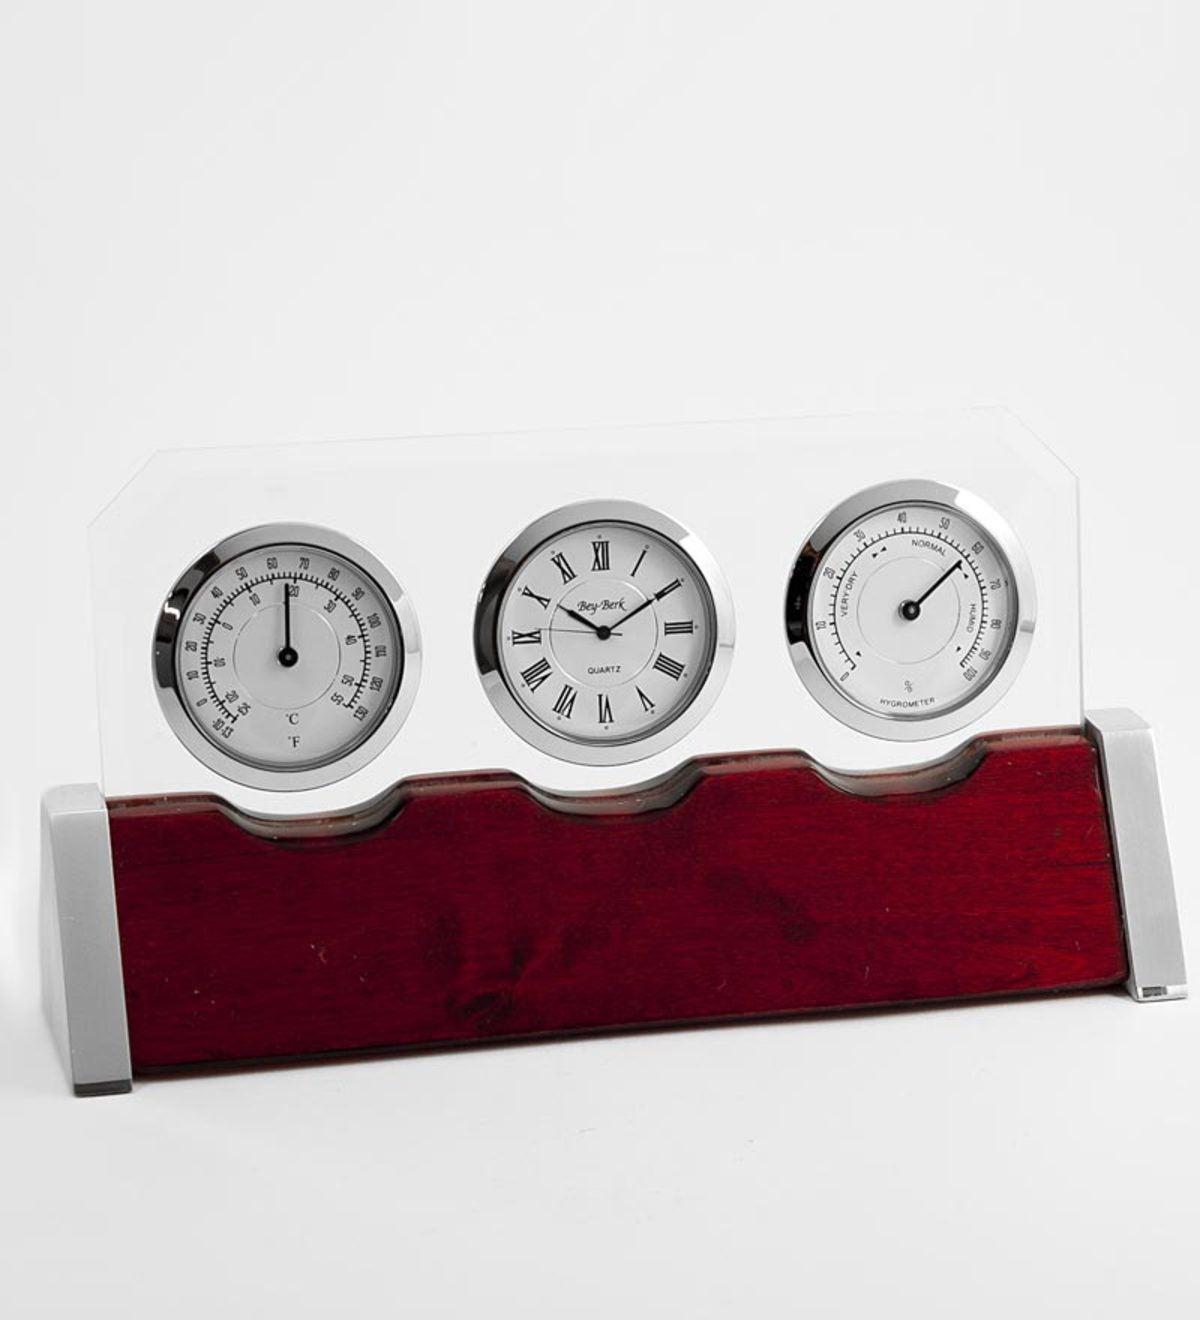 Nature Spring Silver Clock Thermometer Hygrometer - Silver